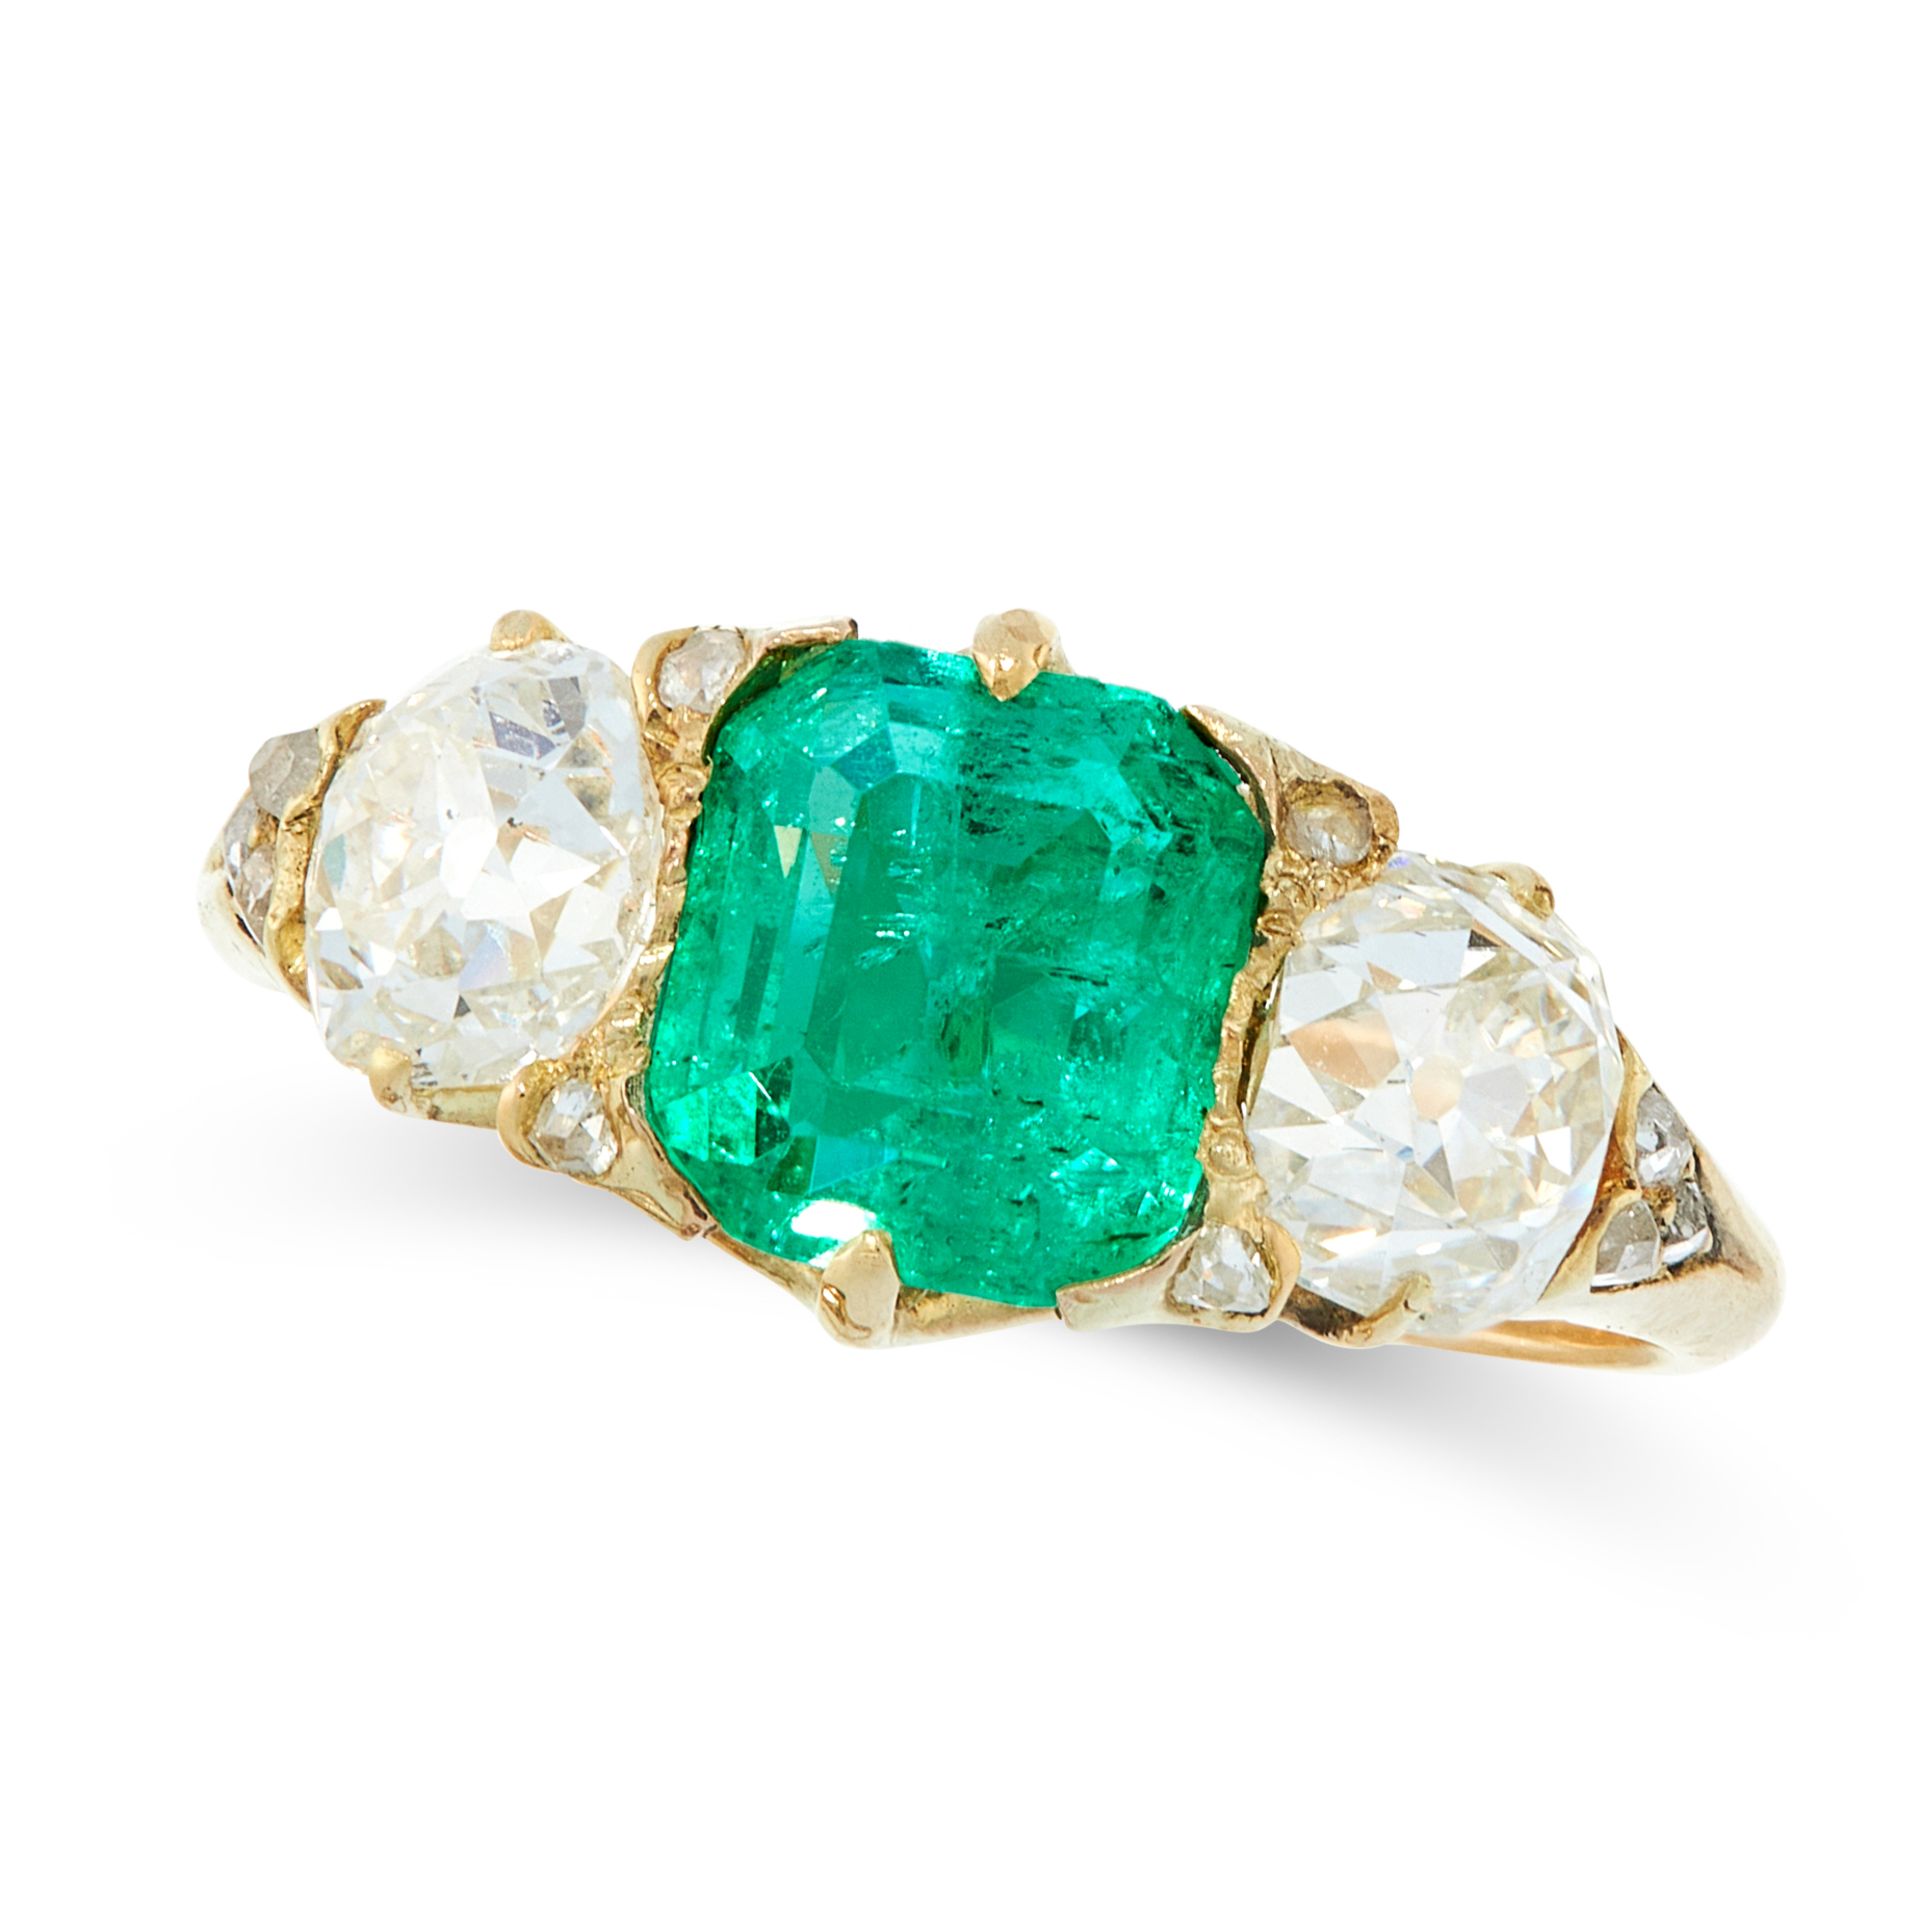 A COLOMBIAN EMERALD AND DIAMOND DRESS RING in high carat yellow gold, set with an emerald cut